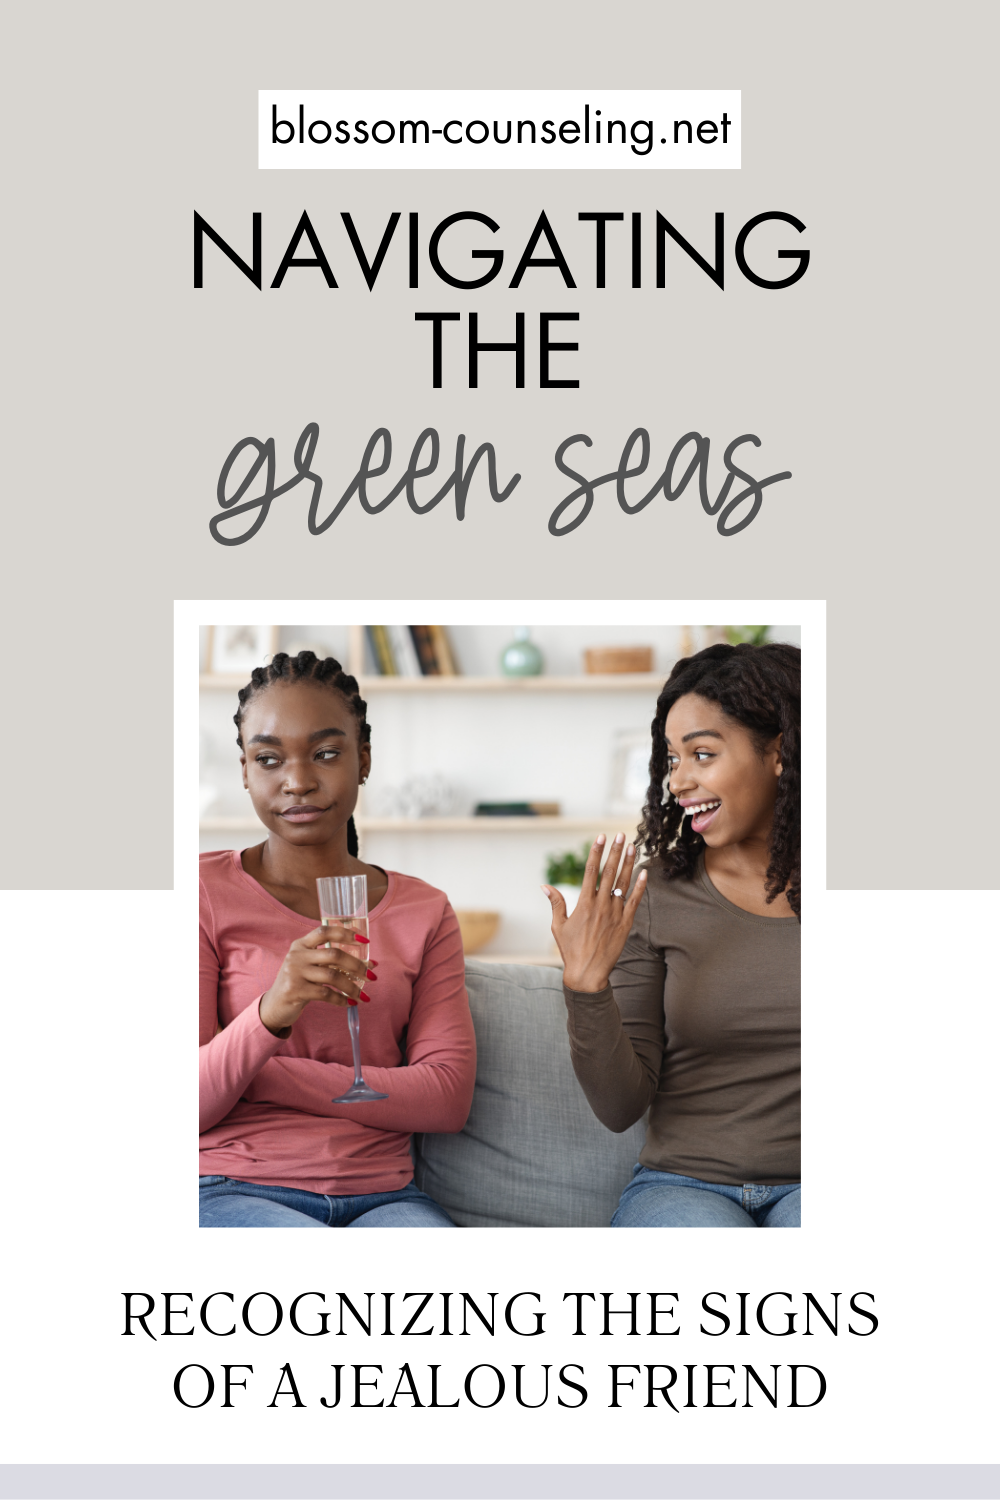 Navigating the Green Seas: Recognizing the Signs of a Jealous Friend